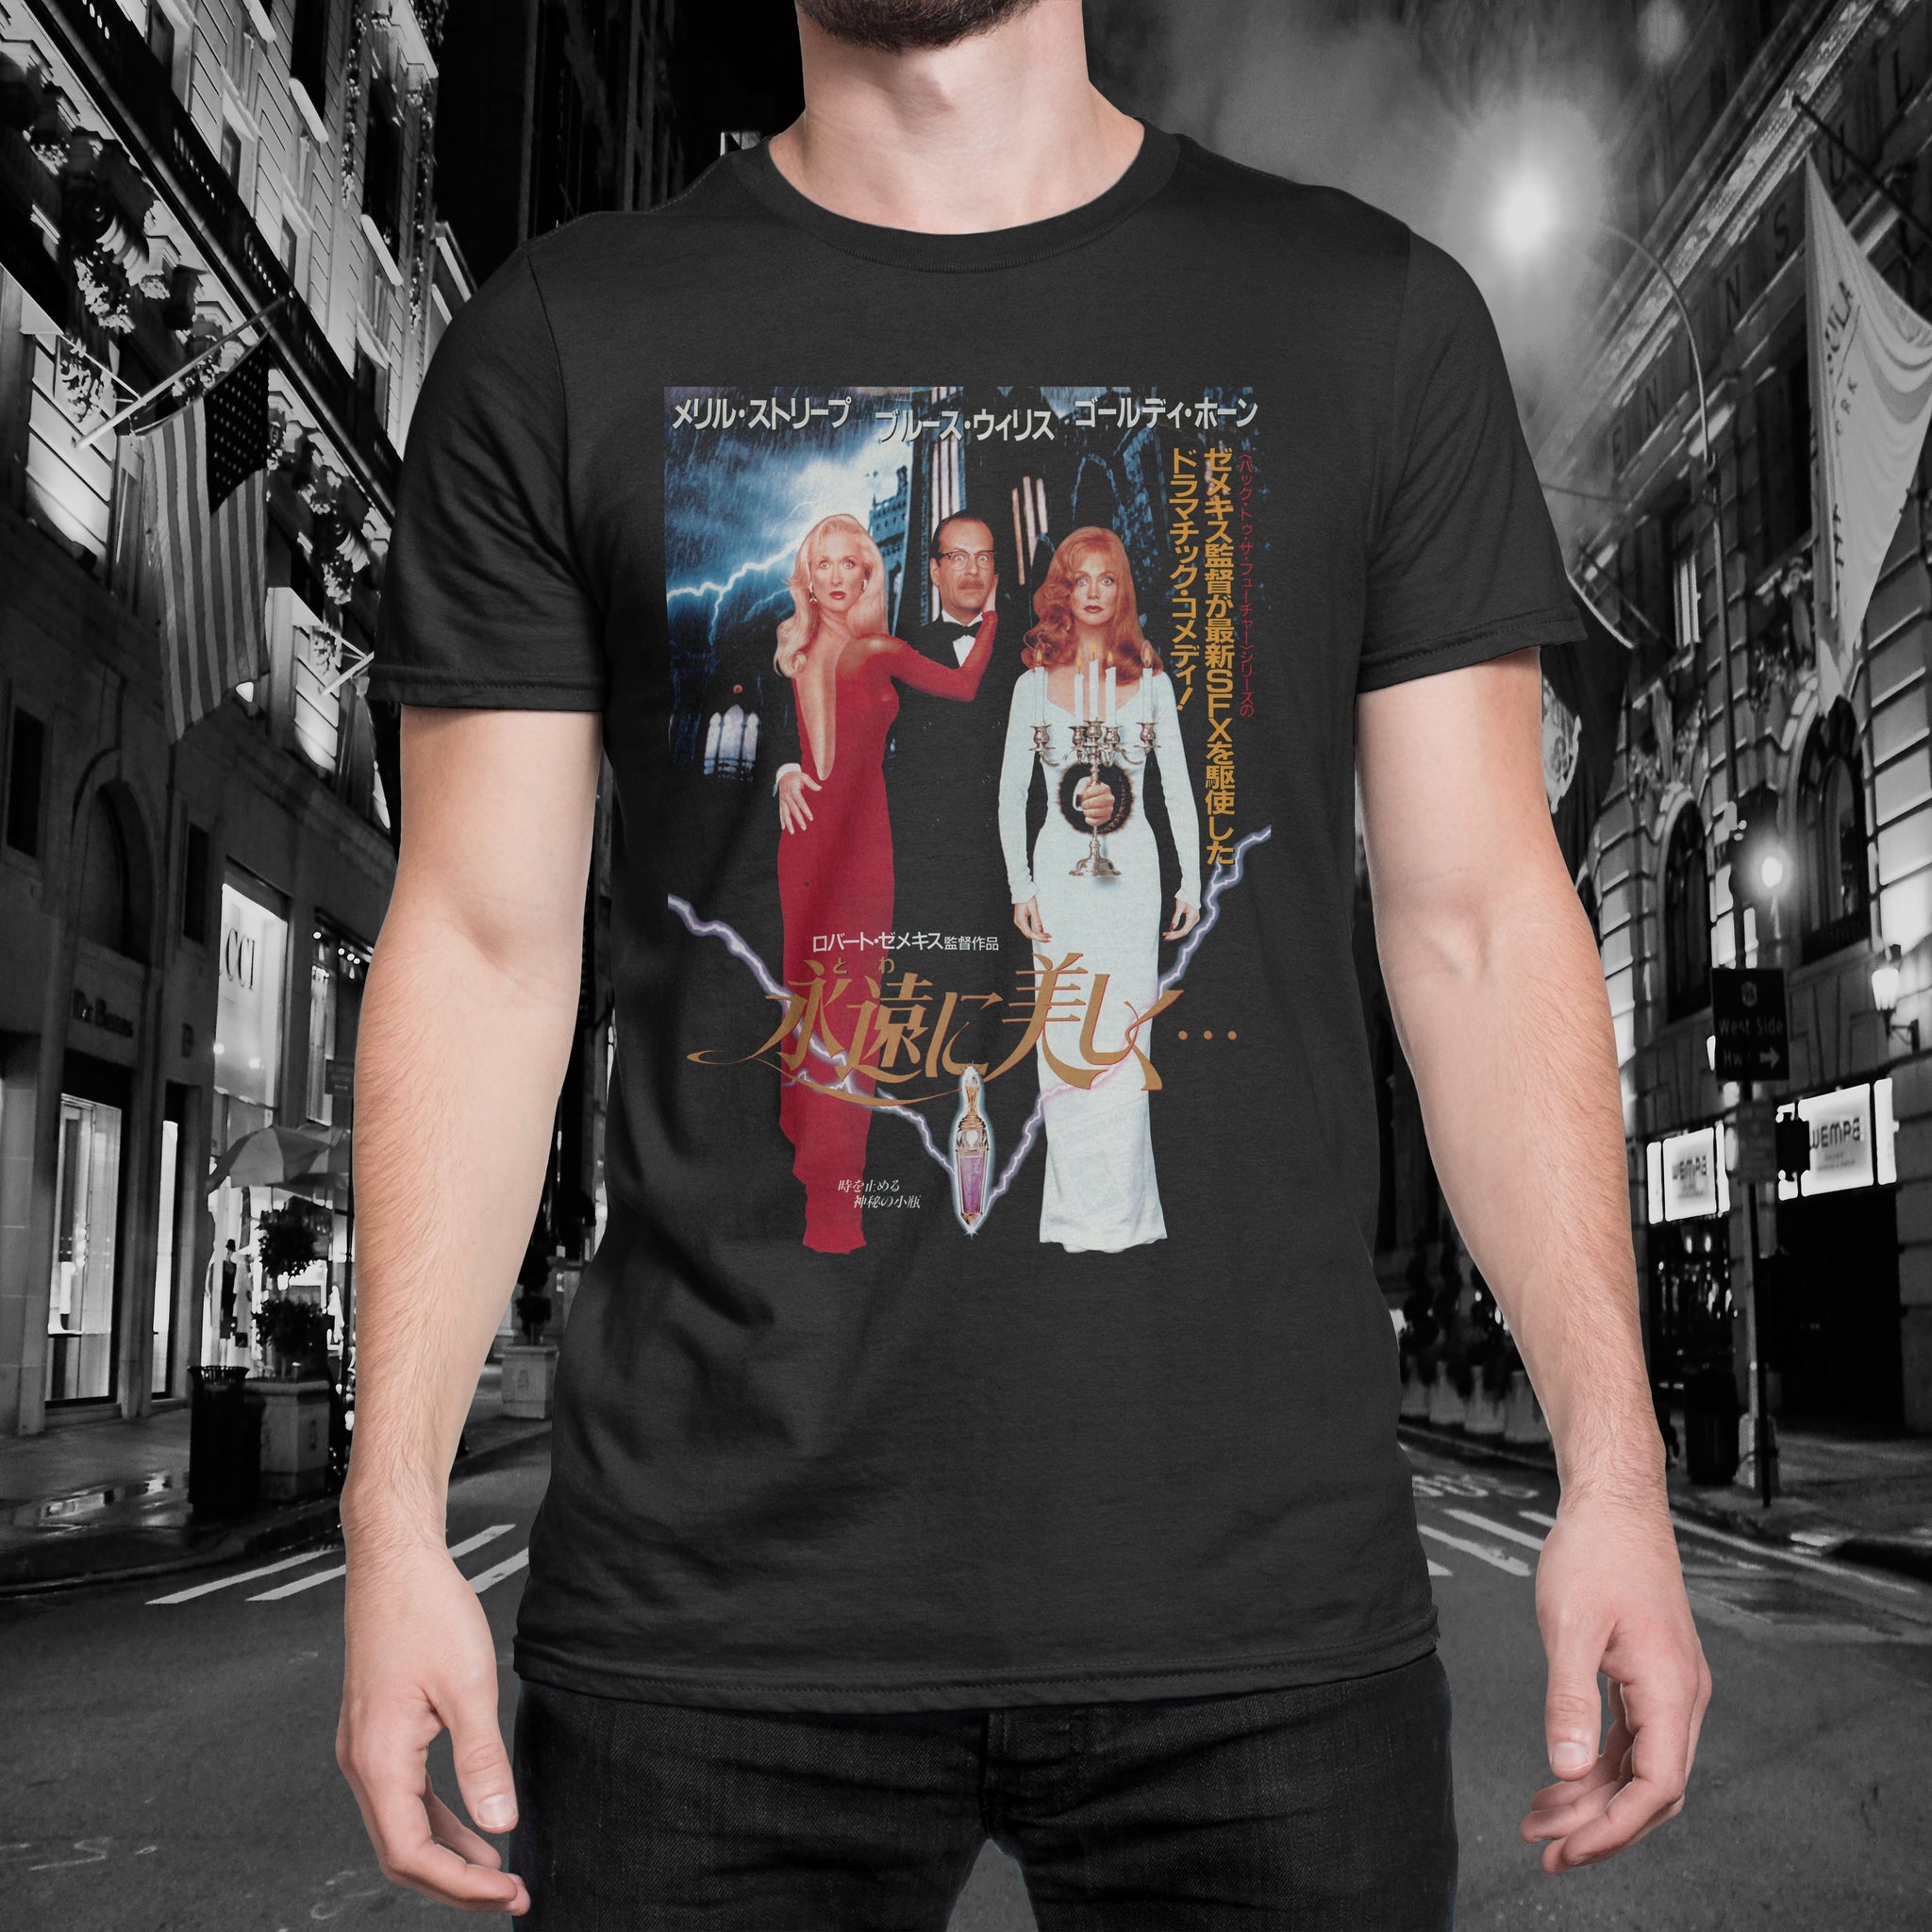 Death Becomes Her "Japan" Tee